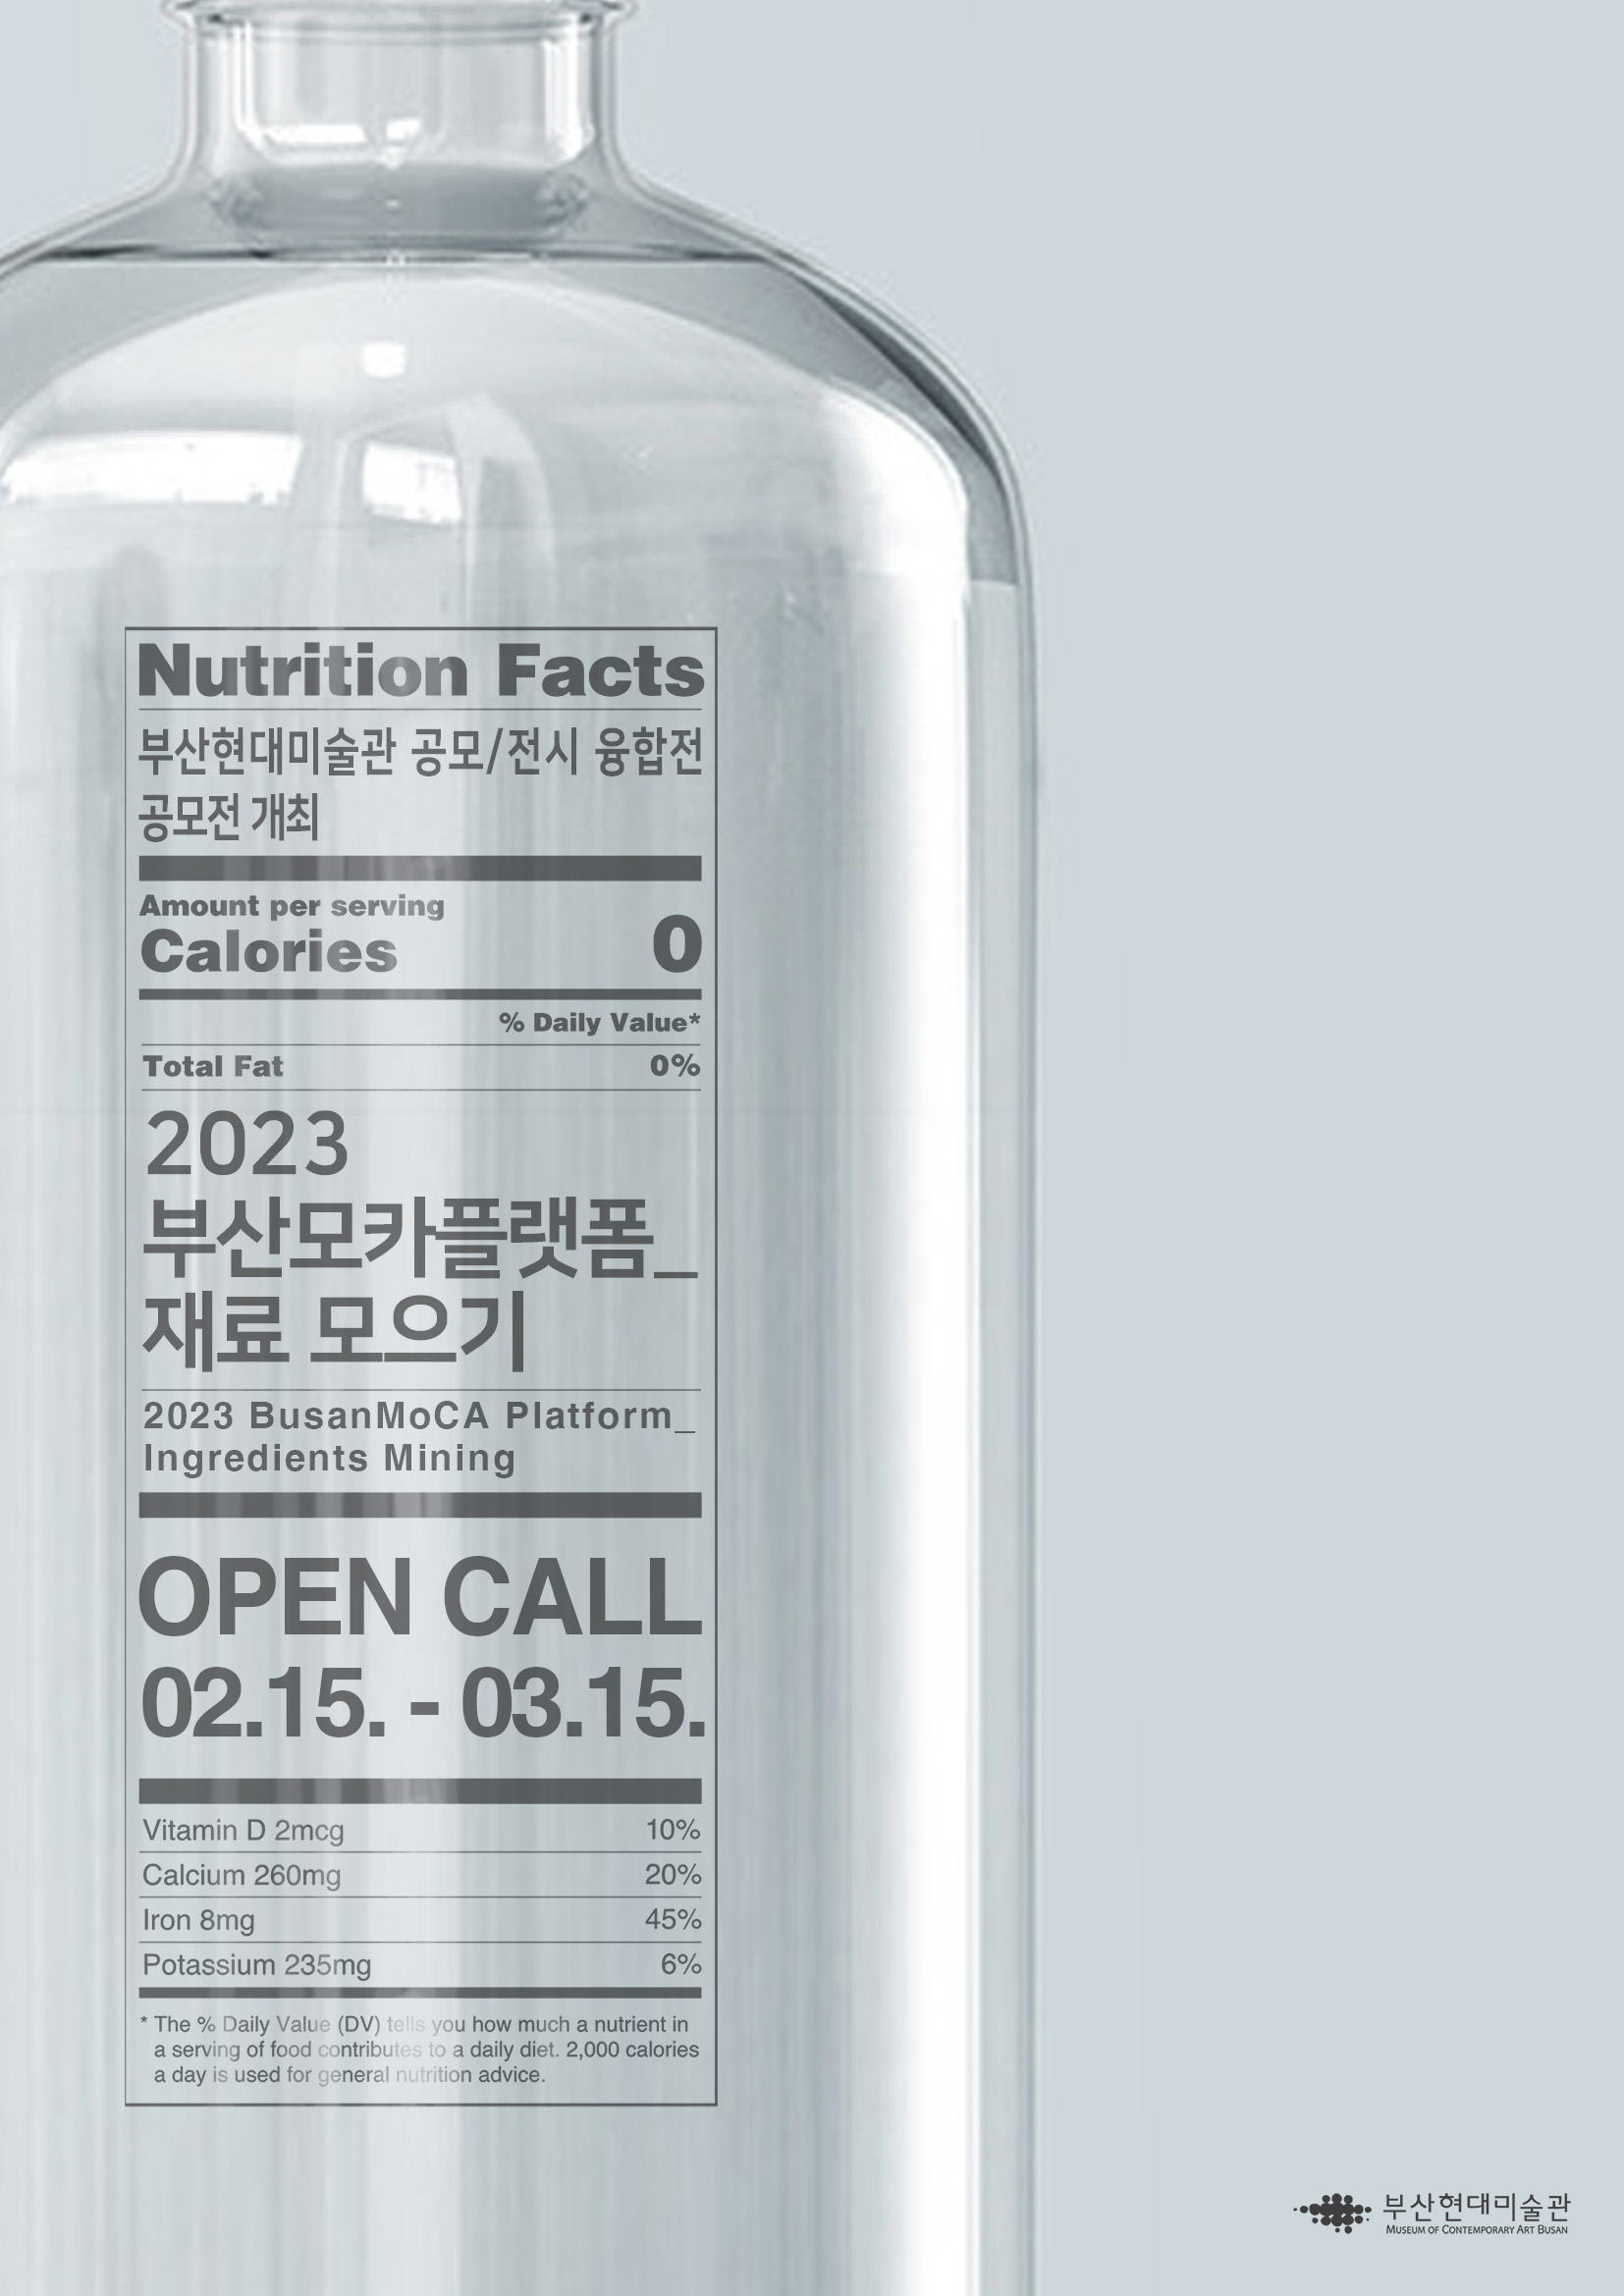 Nutrition Facts 부산현대미술관 공모/전시 융합전 공모전 개최 / Amount per serving Calories 0 / % Daily Value* / Total Fat 0% / 2023 부산모카플랫폼_재료 모으기 / 2023 BusanMoCA Platform_Ingredients Mining / OPEN CALL 02.15. -03.15. / Vitamin D 2mcg 10%, Calcium 260mg 20%, Iron 8mg 45%, Potassium 235mg 6% / * The % Daily Value(DV) tells you how much a nutrient in a serving of food contributes to daily diet. 2,000 calories a day is uesd for general nutrition advice.